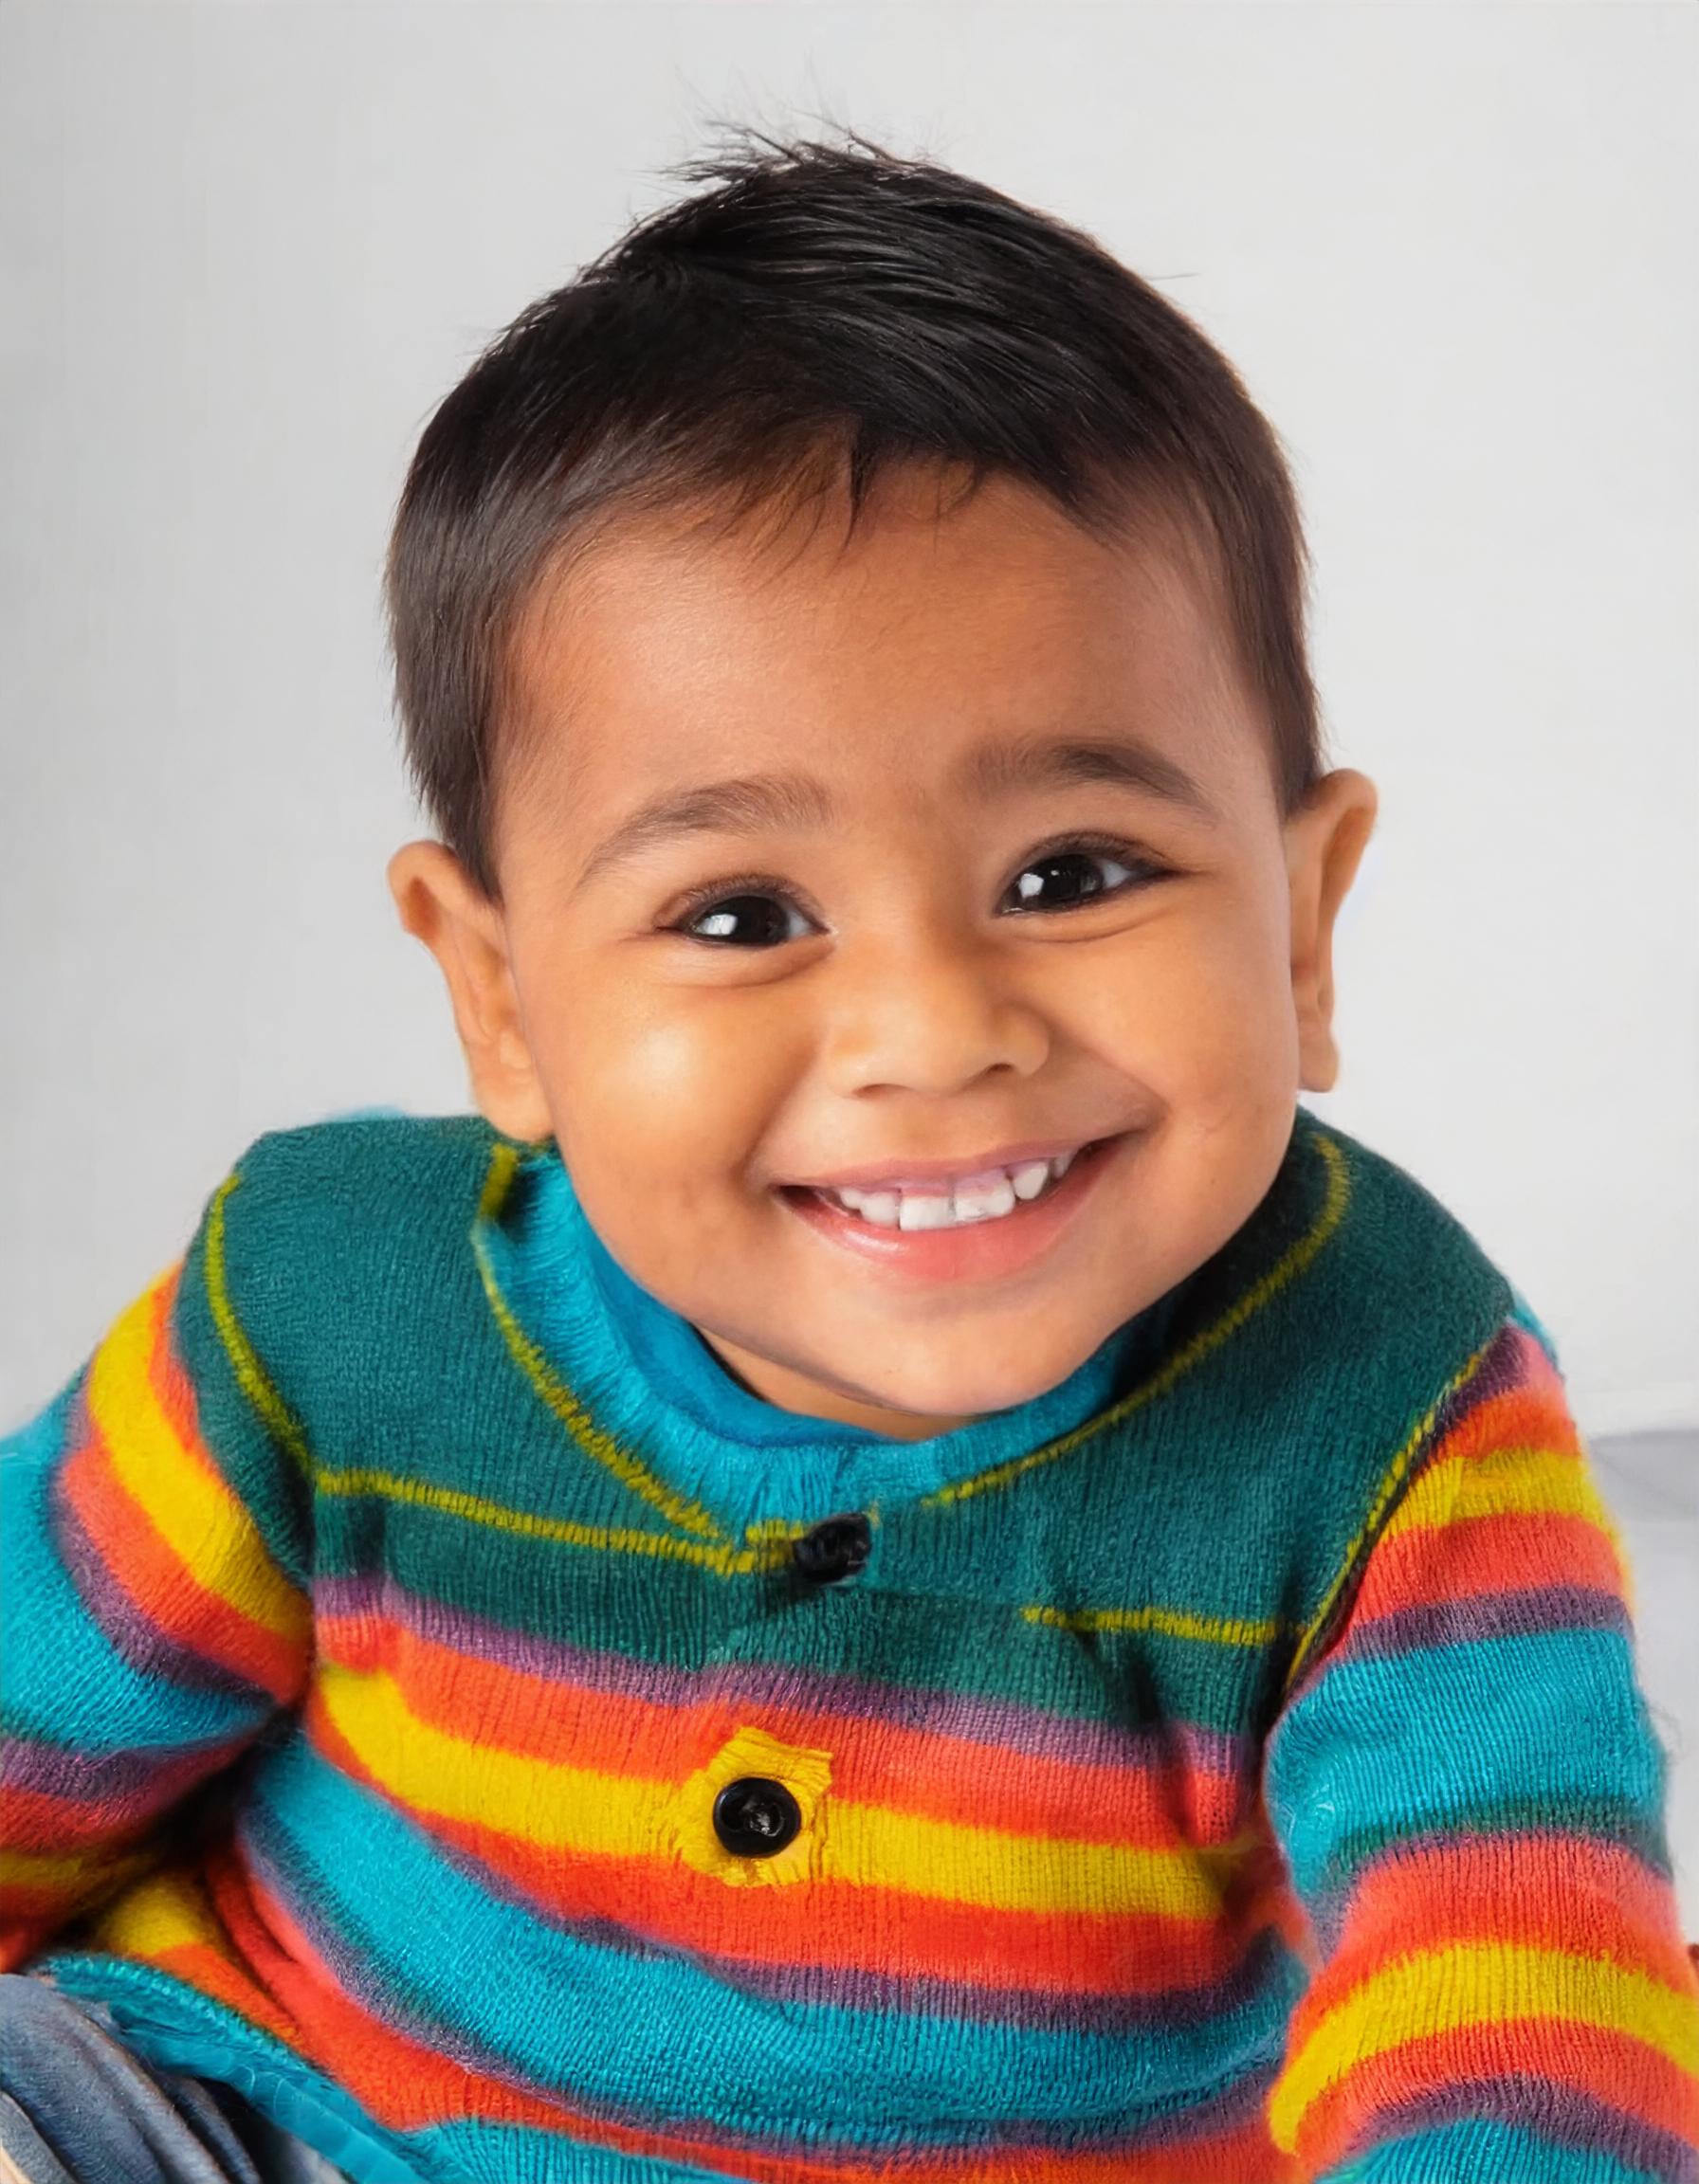 Firefly-a-baby-boy-smiling-1-years-old-Indonesian-close-up-photo-isolated-over-the-white-backgro-2